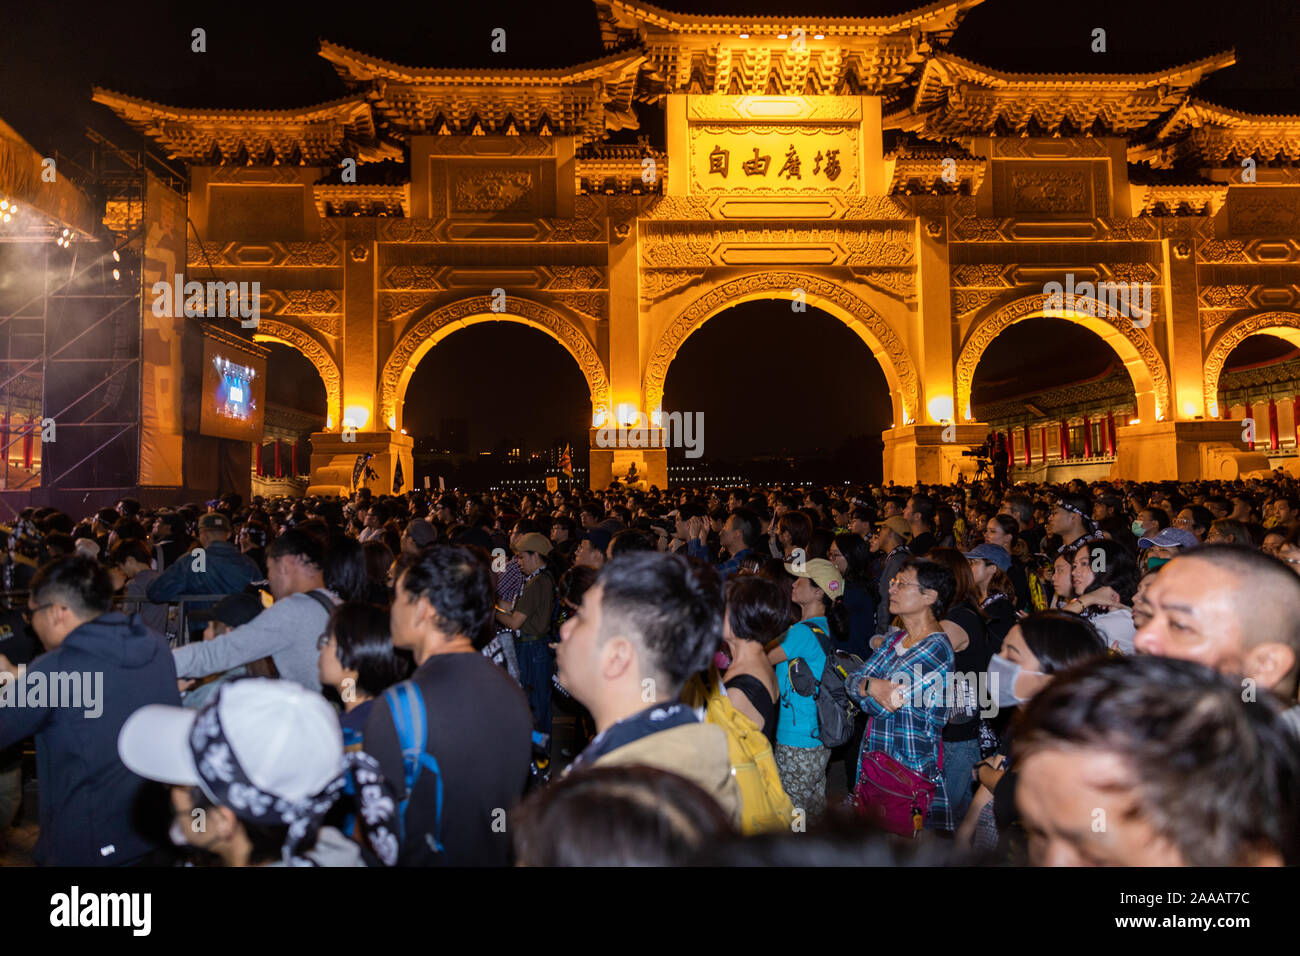 On 17th November 2019 thousands of Taiwanese attending a concert in support of Hong Kong pro democracy/freedom protesters at Liberty Square in Taipei. A number of famous Taiwanese pop stars played. Stock Photo